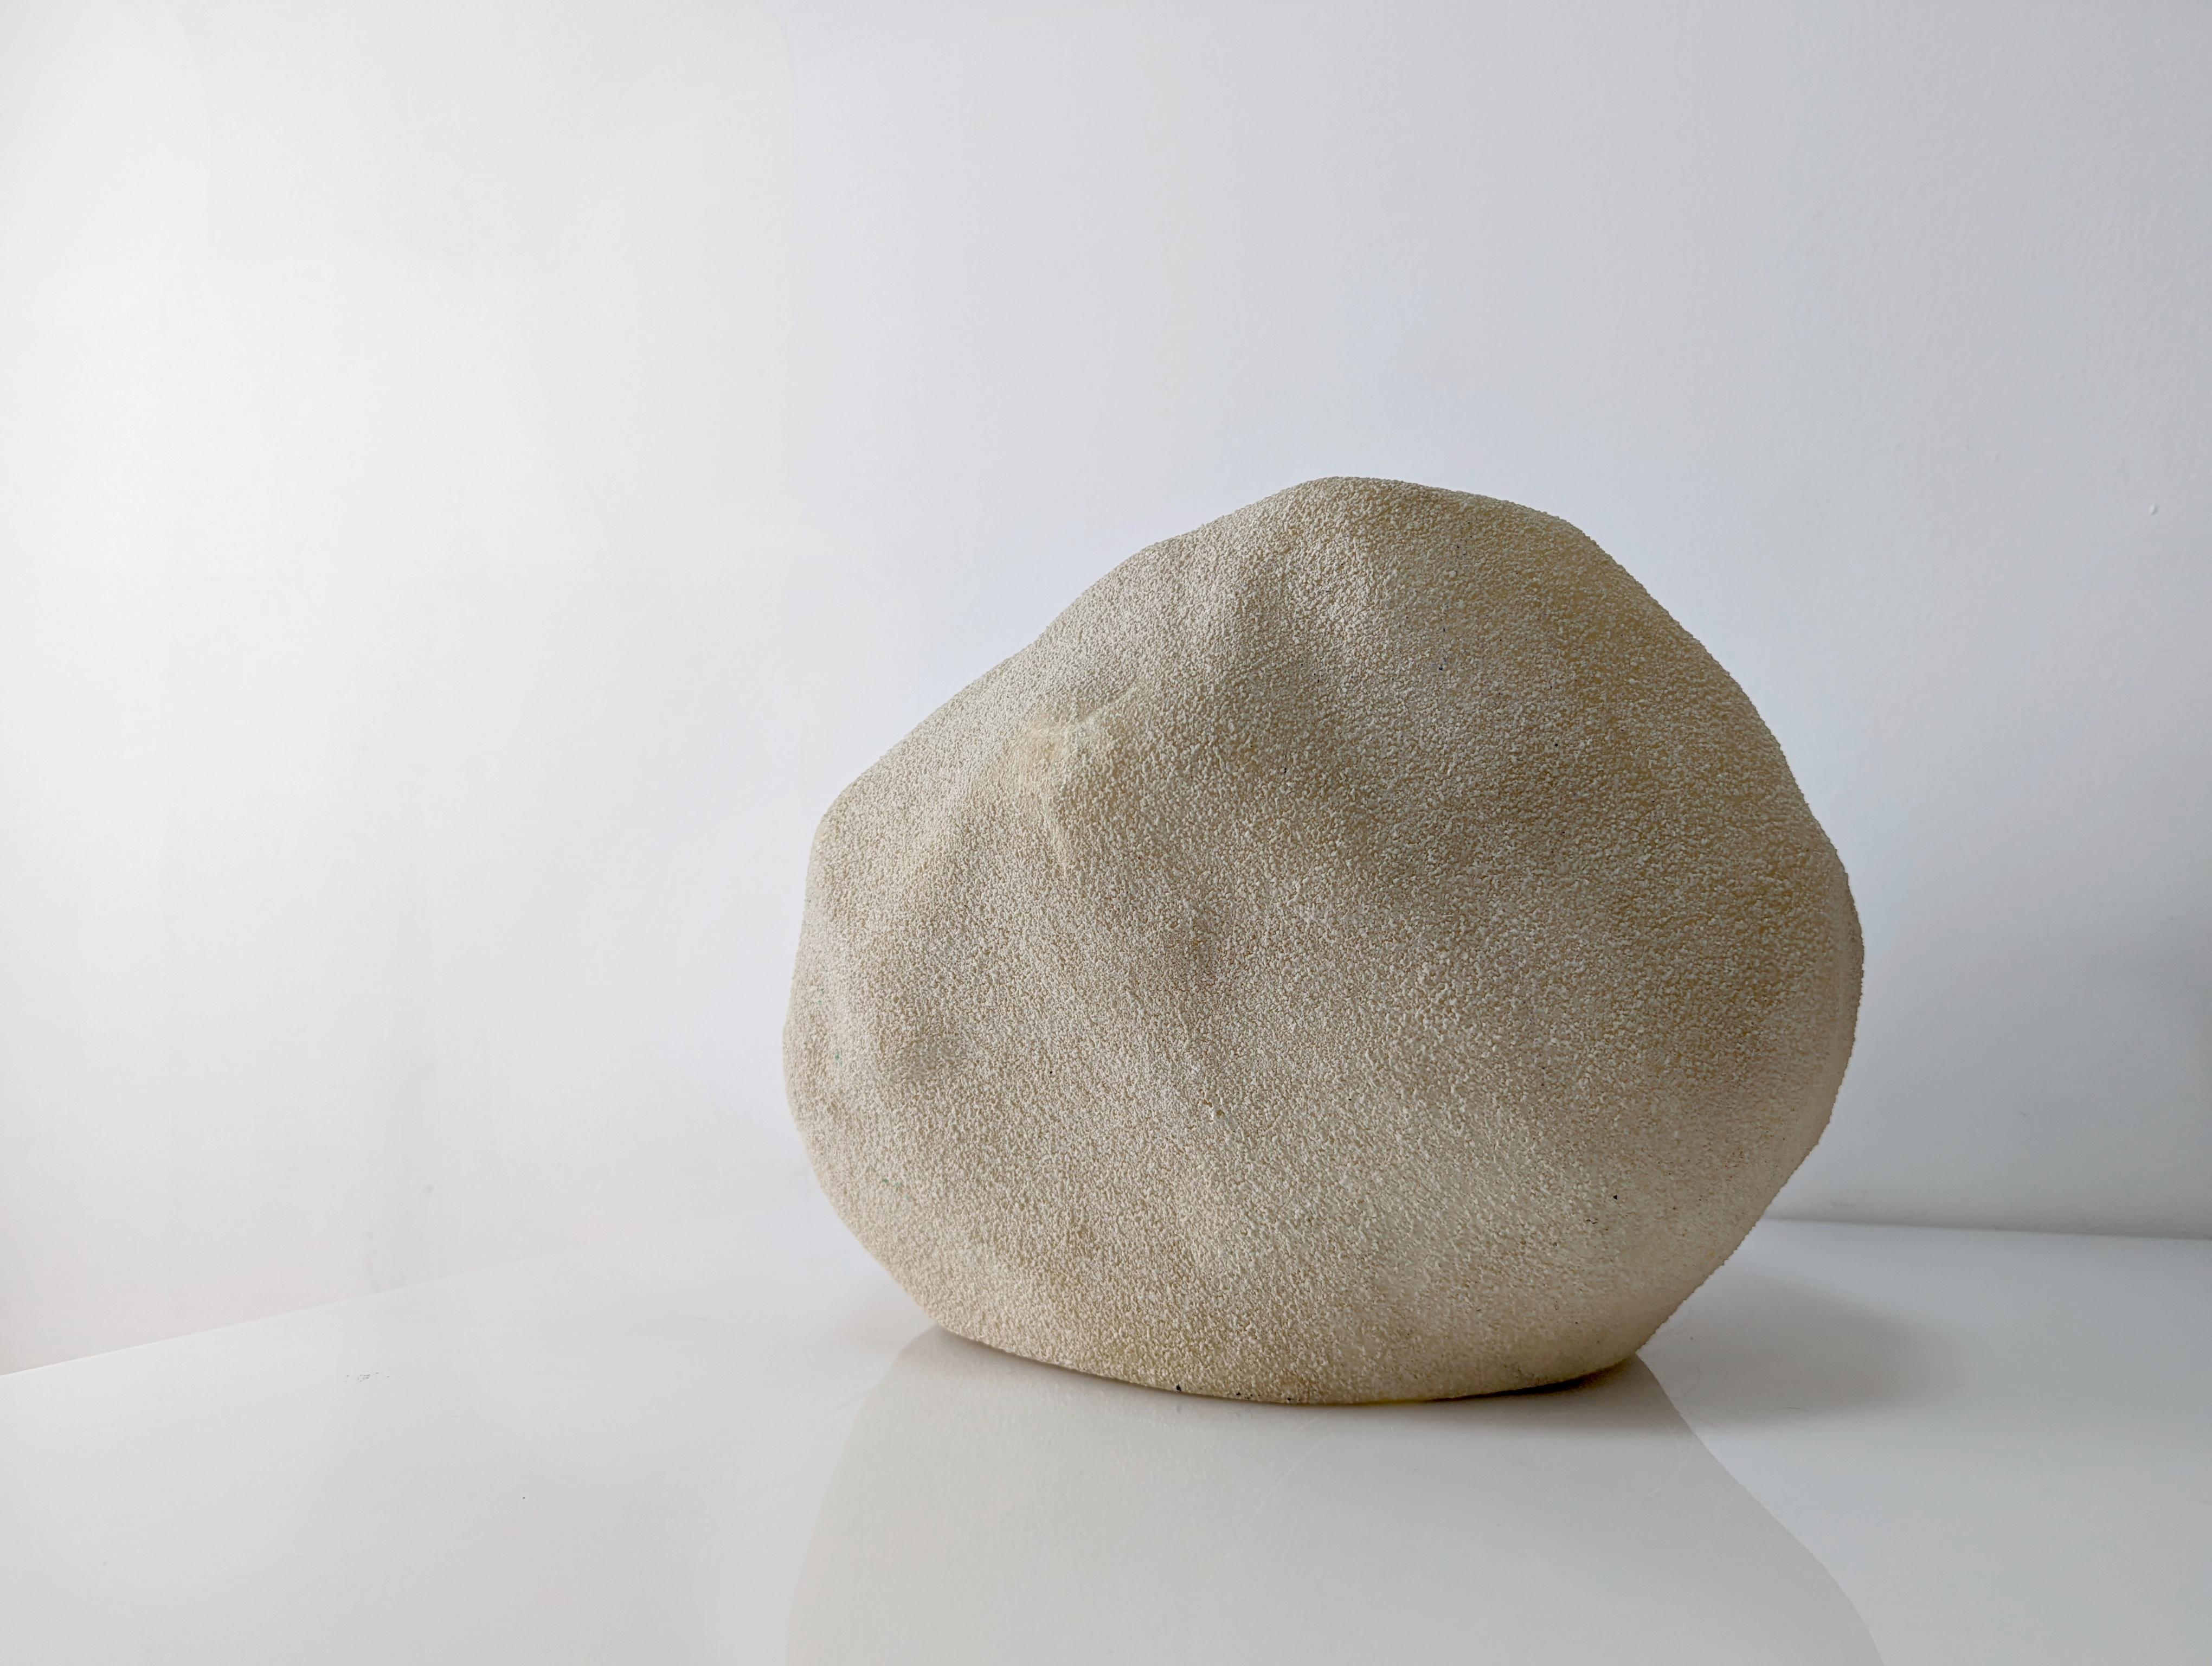 Dora rock lamp designed by André Cazenave for the Italian house Singleton in the 70s. Made of fiber and marble powder, ideal for both indoors and outdoors creating natural and relaxing environments thanks to its soft light.